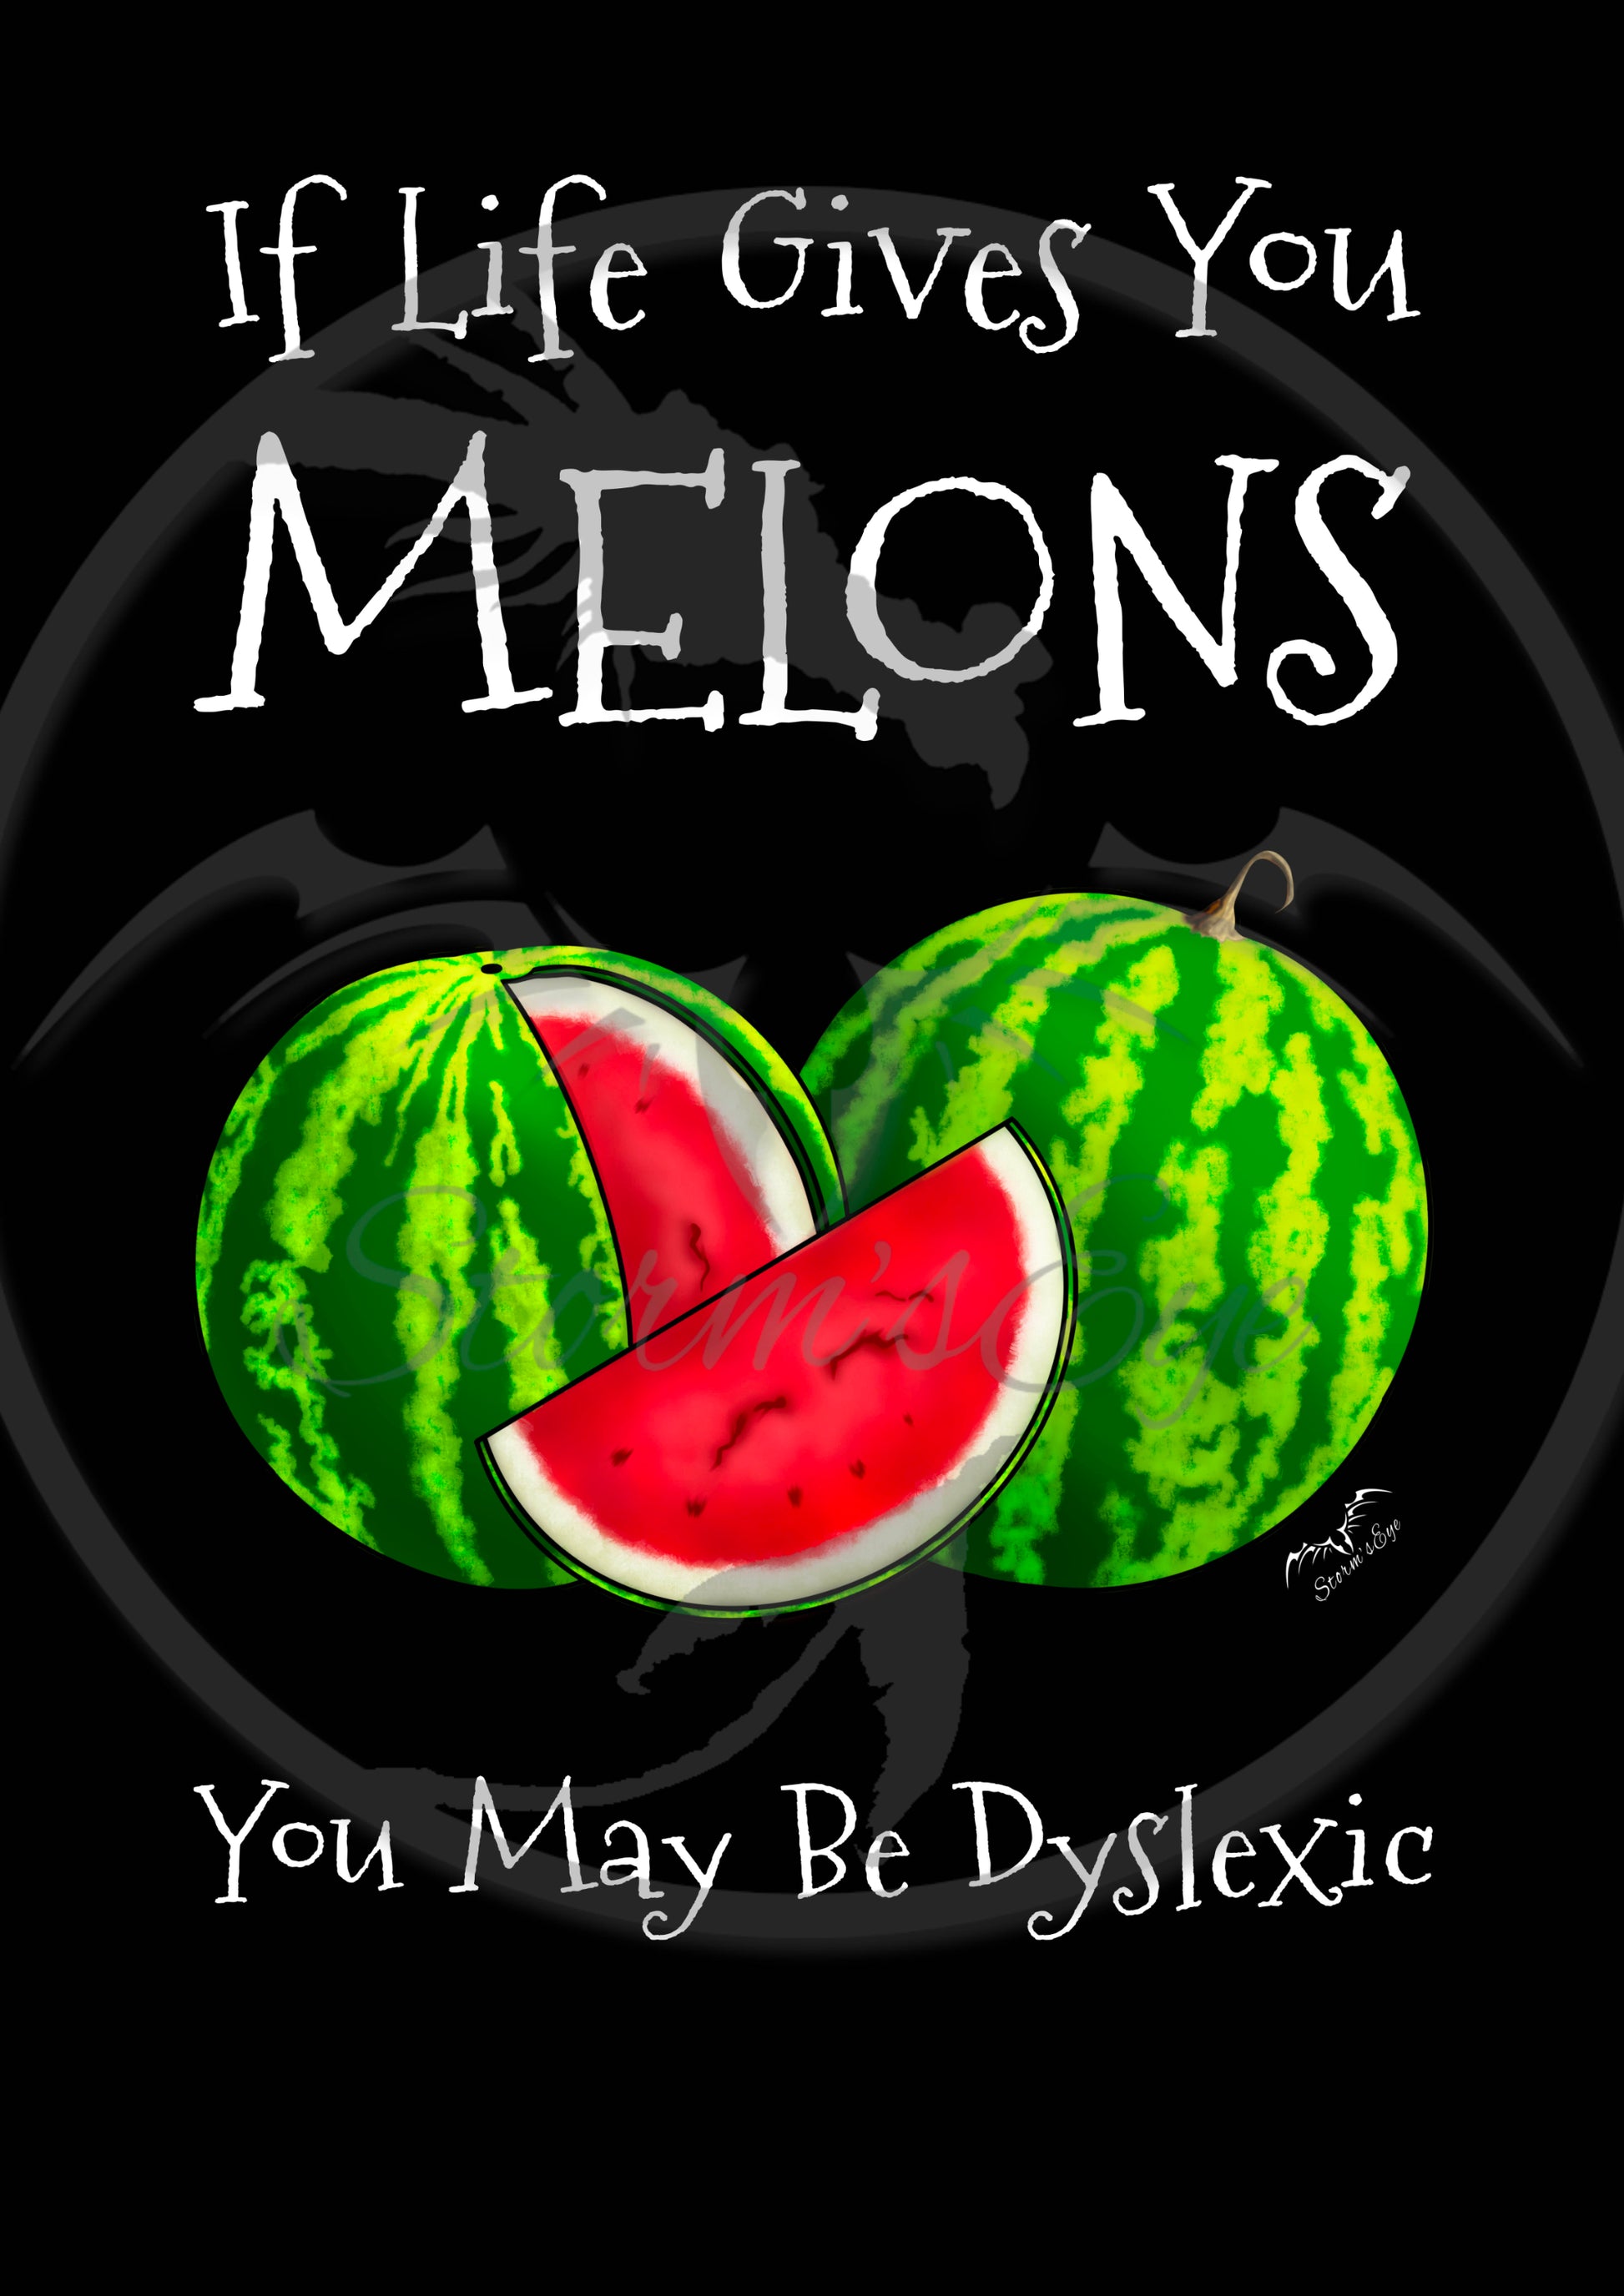 Funny Dyslexia Melons design by Stormseye Design